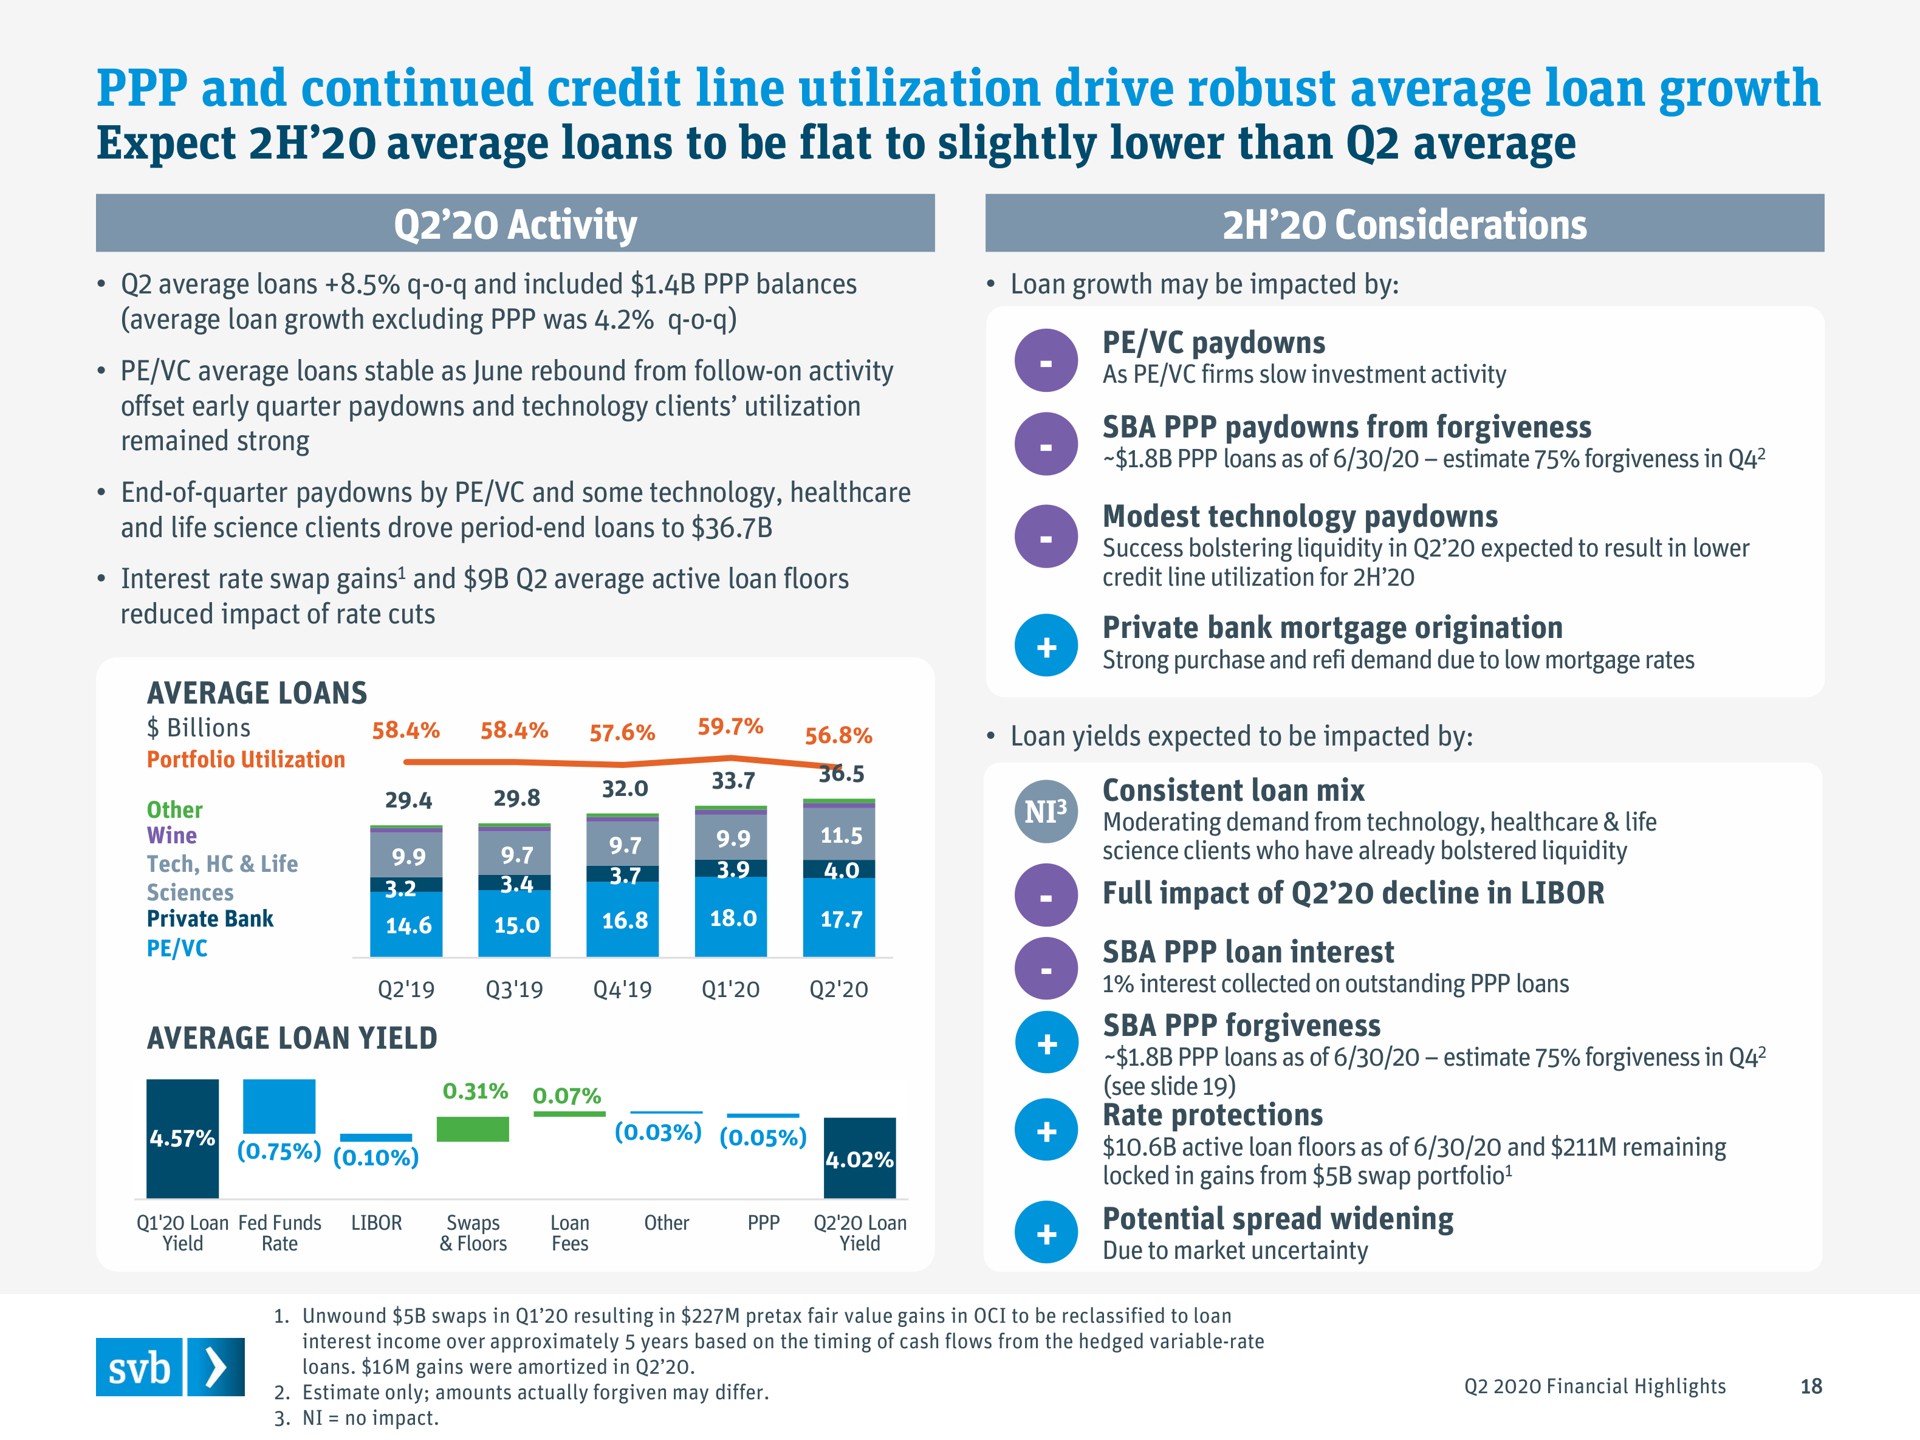 and continued credit line utilization drive robust average loan growth | Silicon Valley Bank